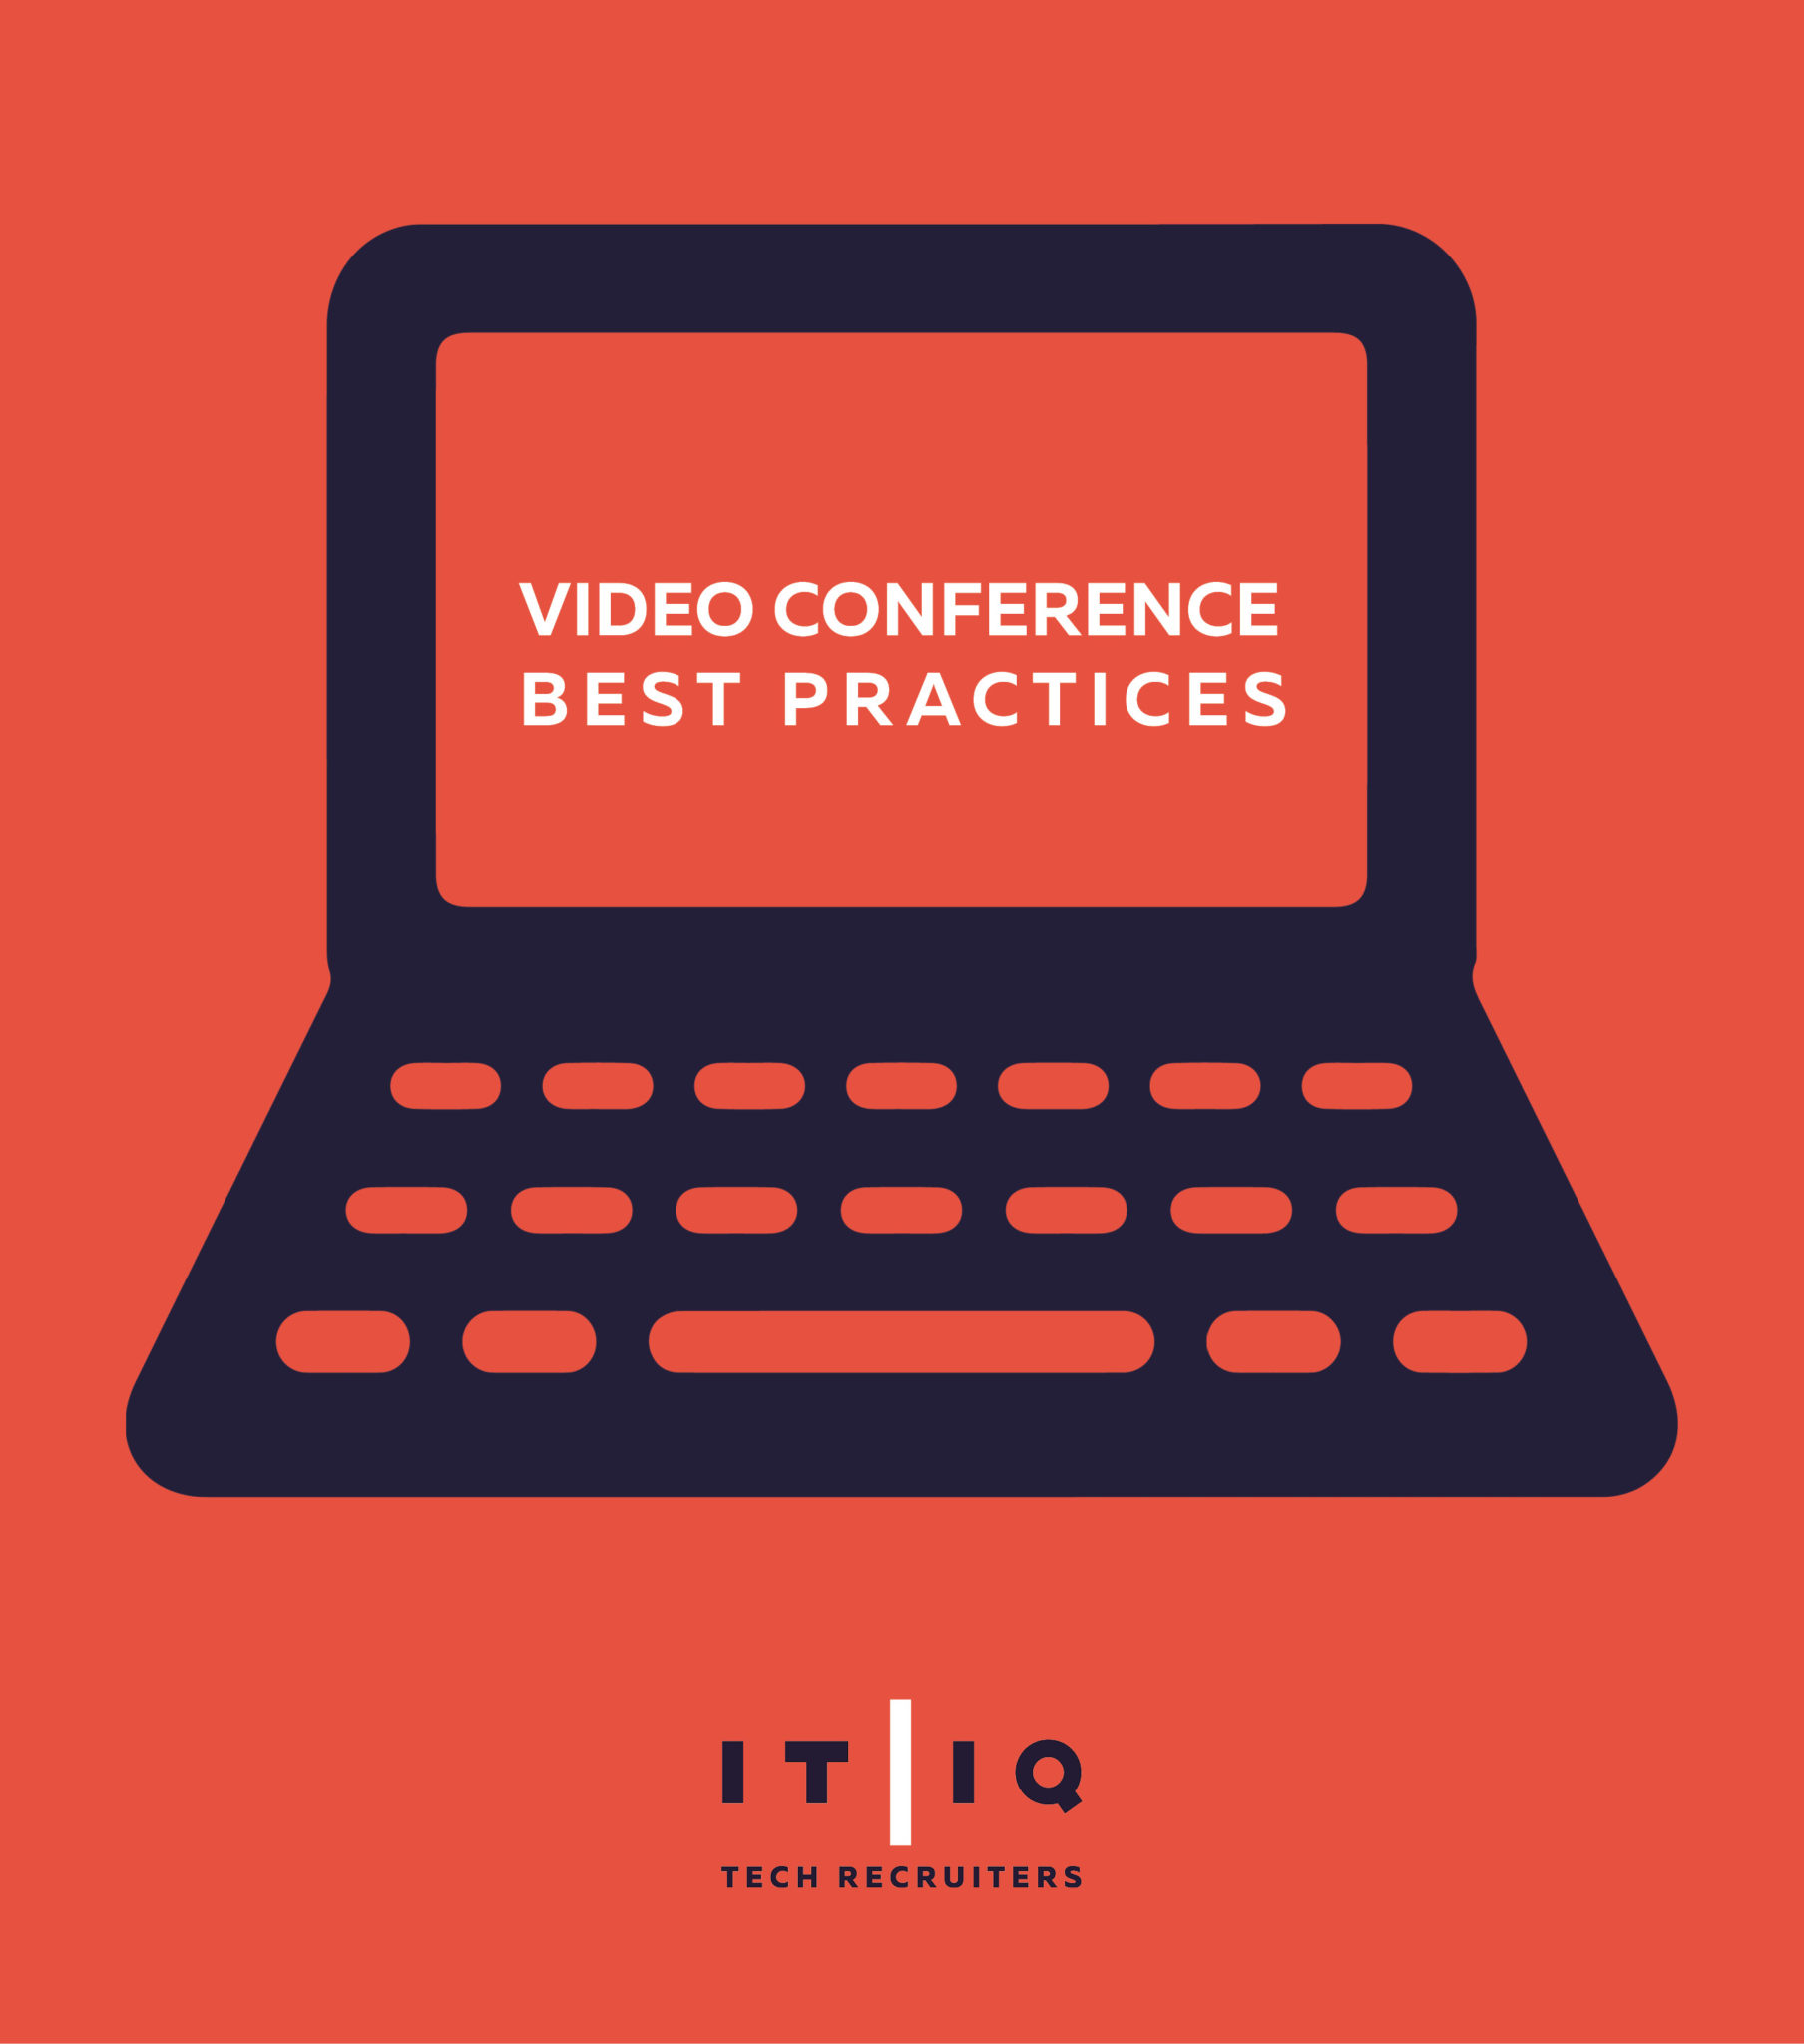 A black laptop computer icon with white text Video Conference Best Practices against a red background with the ITIQ Tech Recruiters logo in bottom center